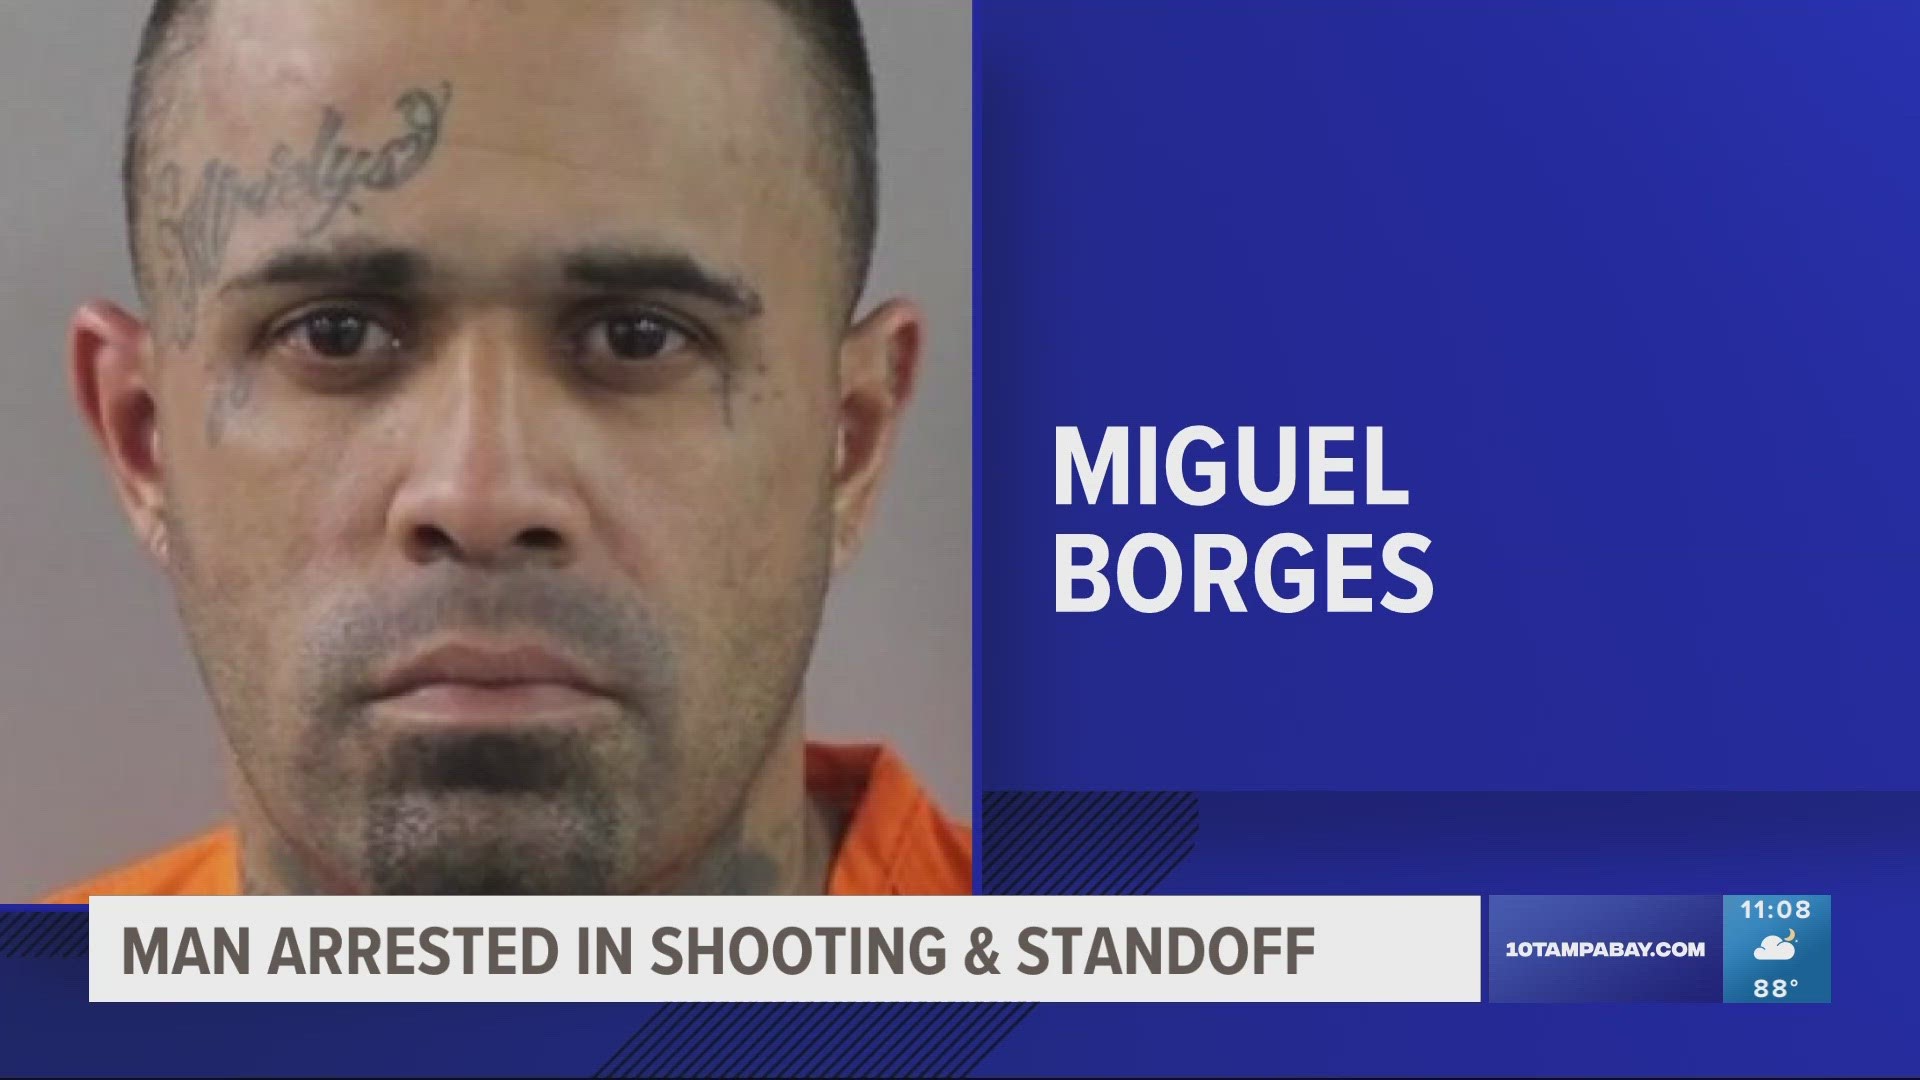 Miguel Borges was charged with aggravated battery of a person with a firearm, possession of a firearm by a delinquent and unarmed burglary of an occupied dwelling.